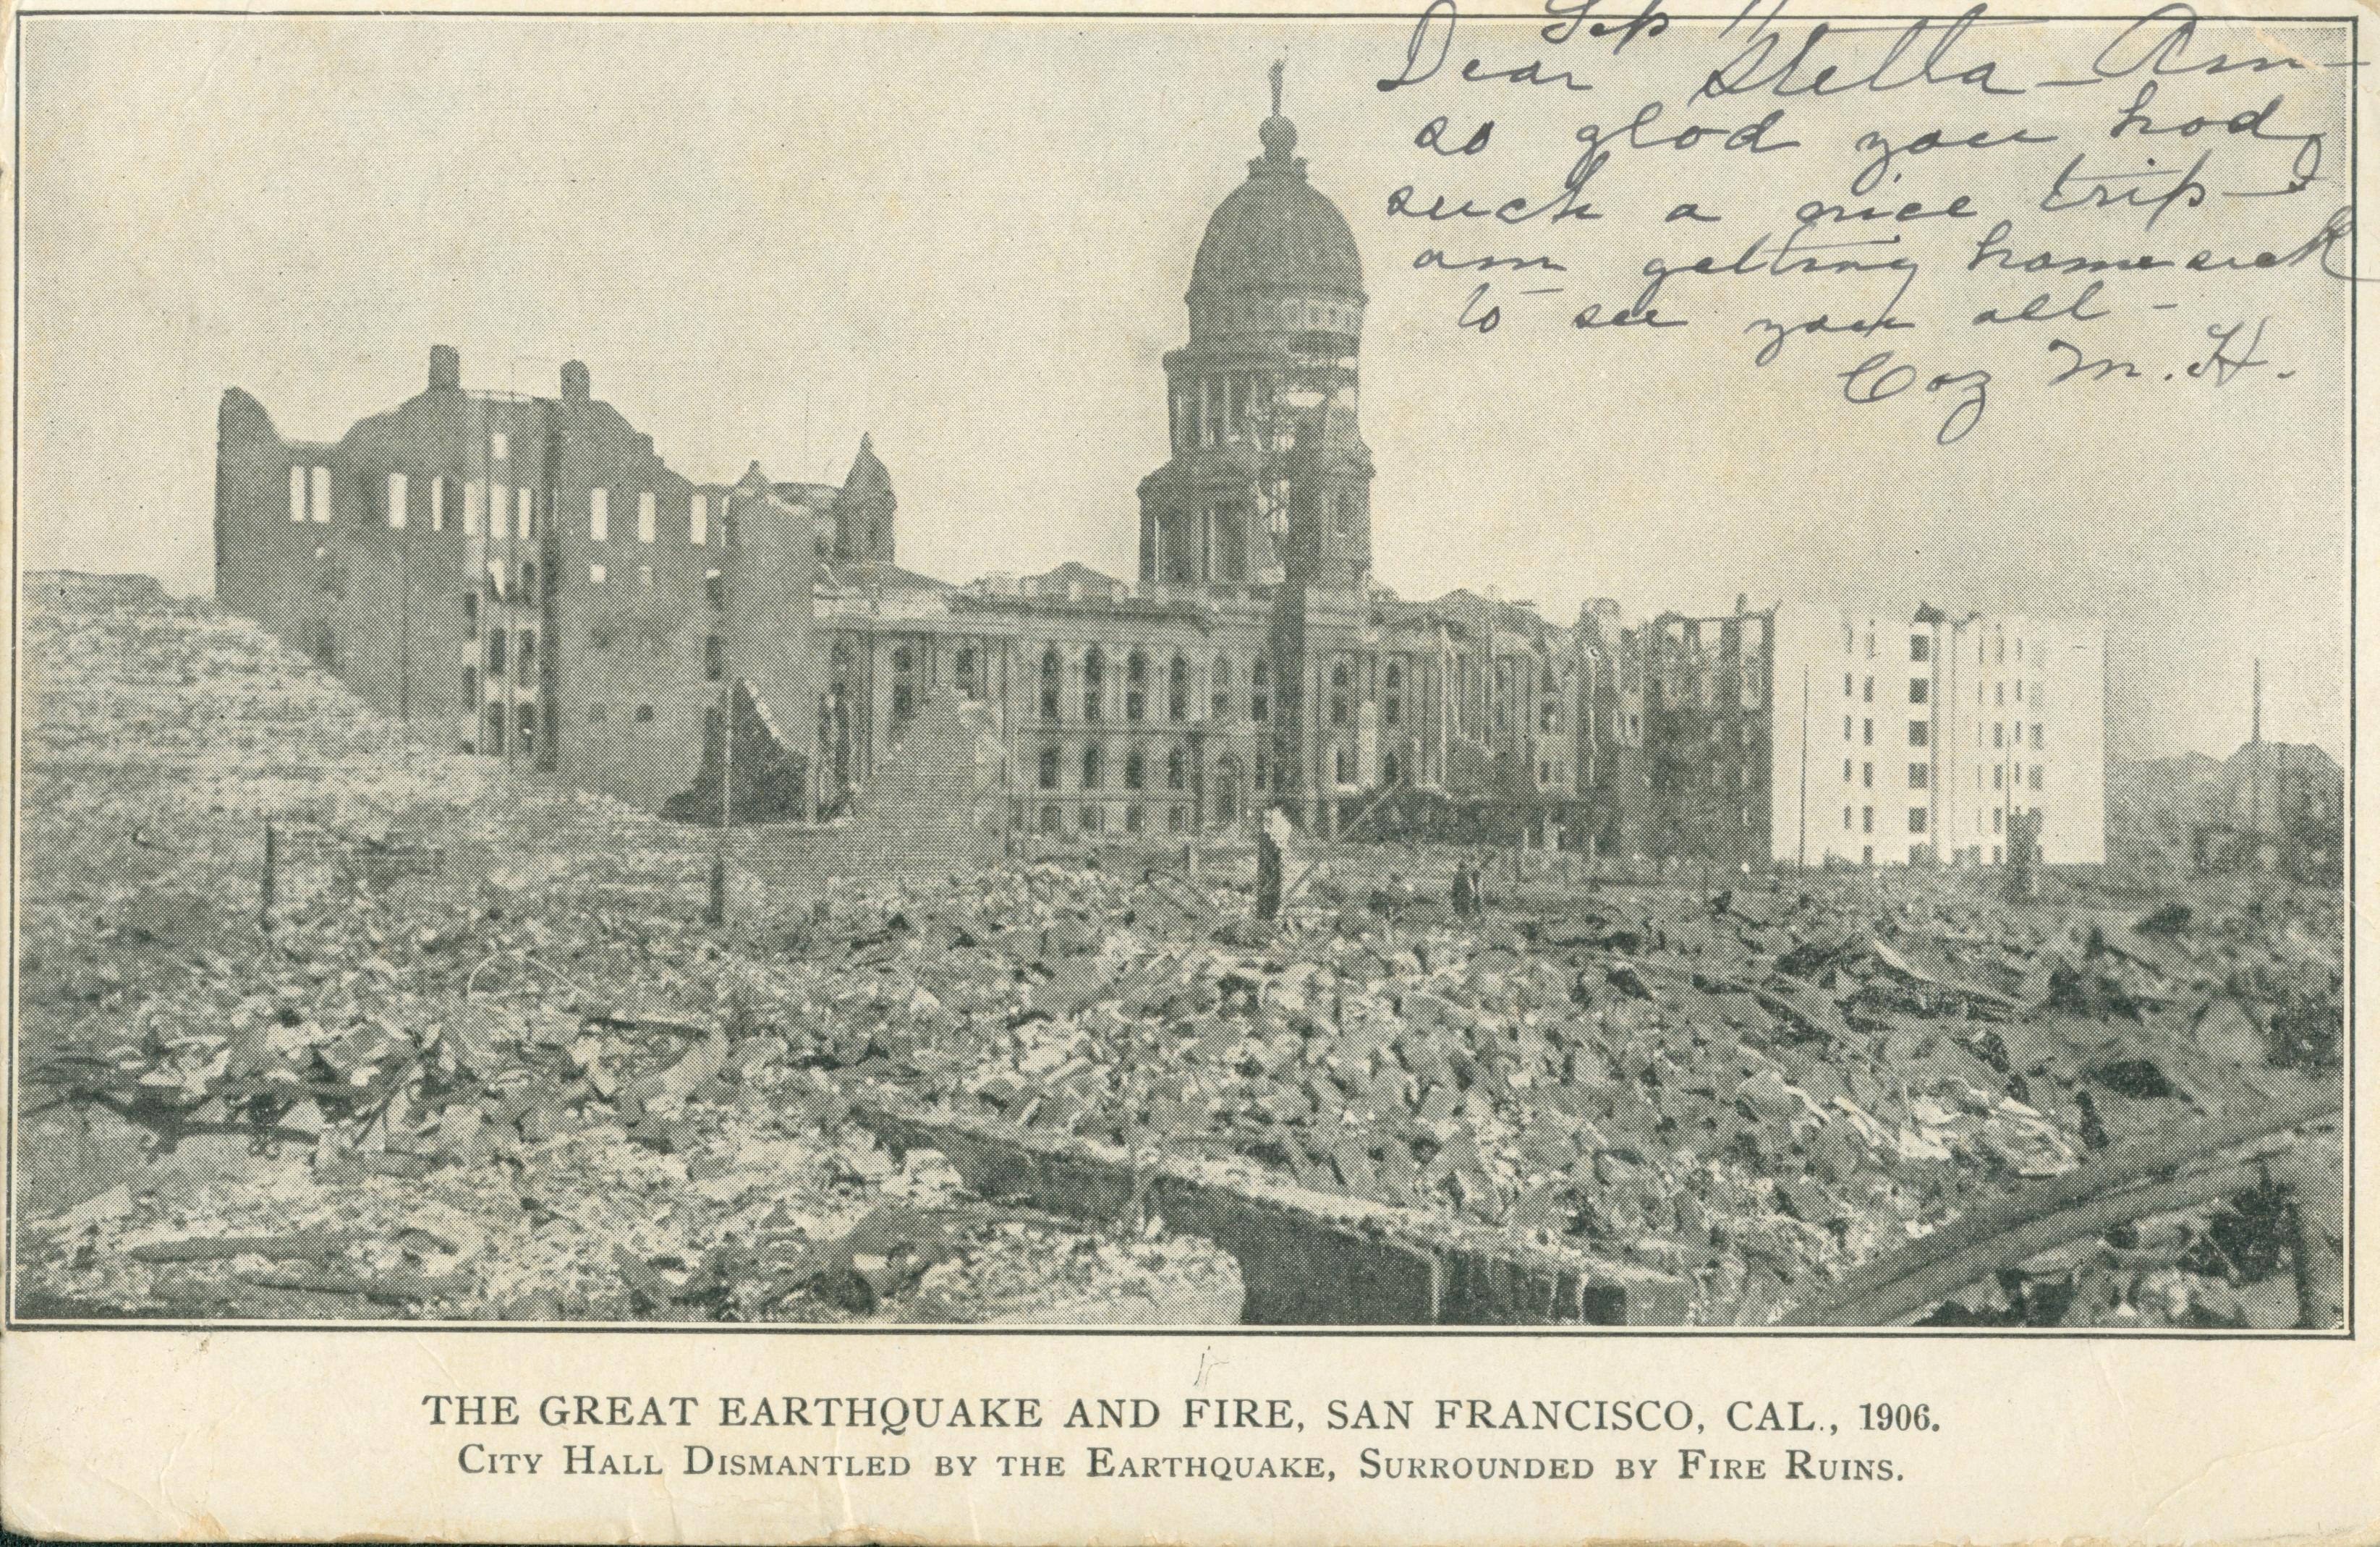 Shows the ruins of City Hall after the earthquake